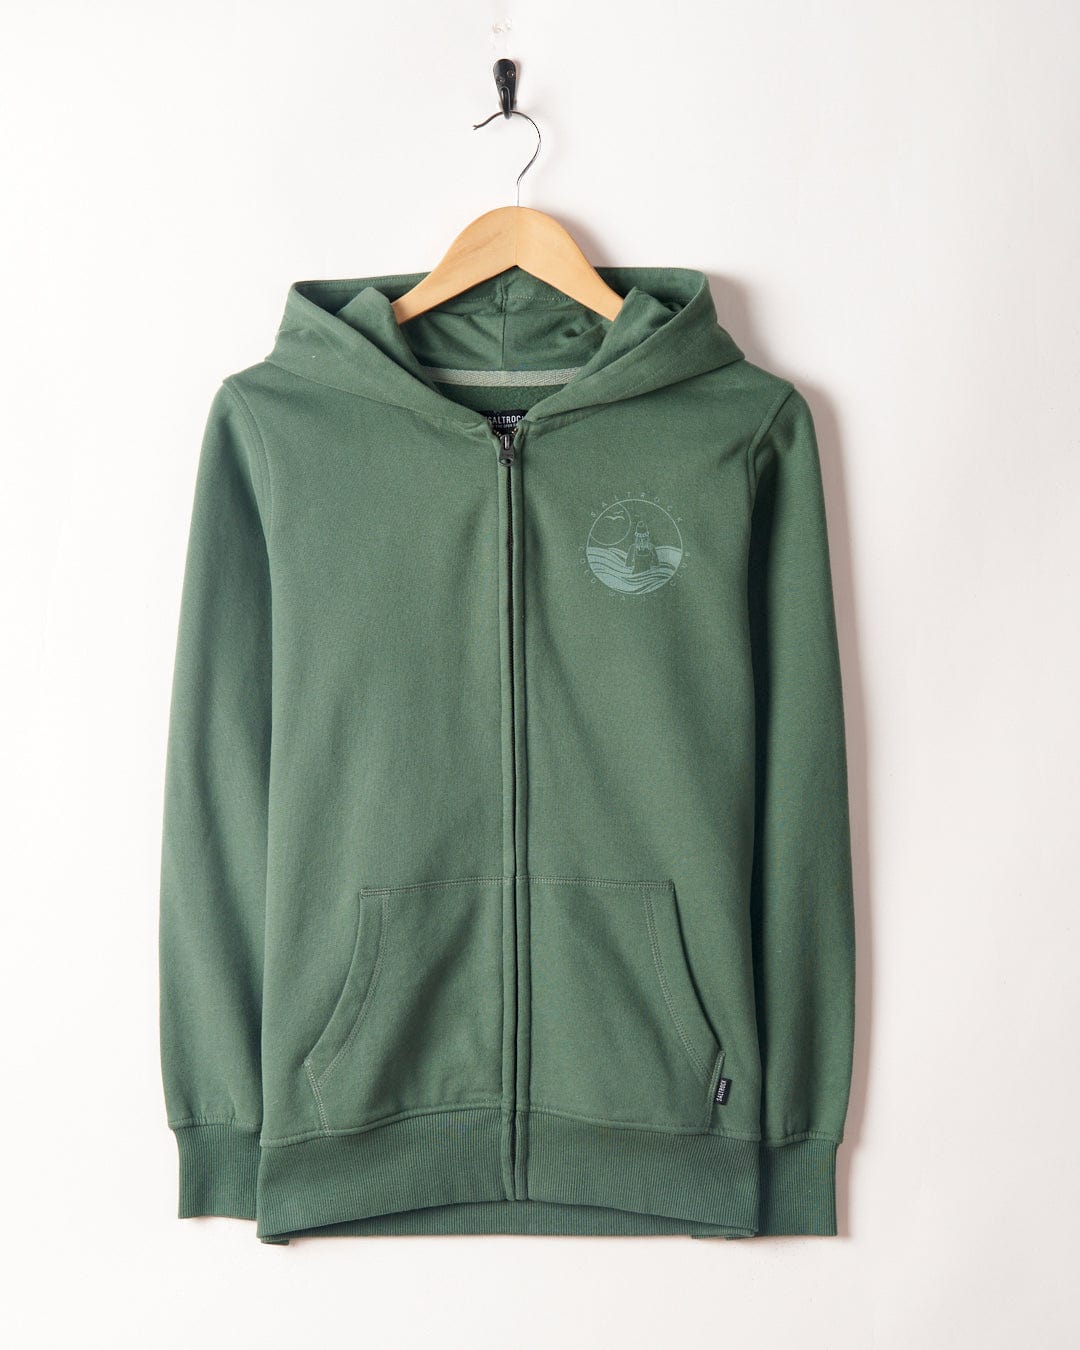 Saltrock Coldwater Club Ladies Zip Hoodie in Green with a peached soft hand feel and a logo on the left chest, hanging on a hook against a white wall.